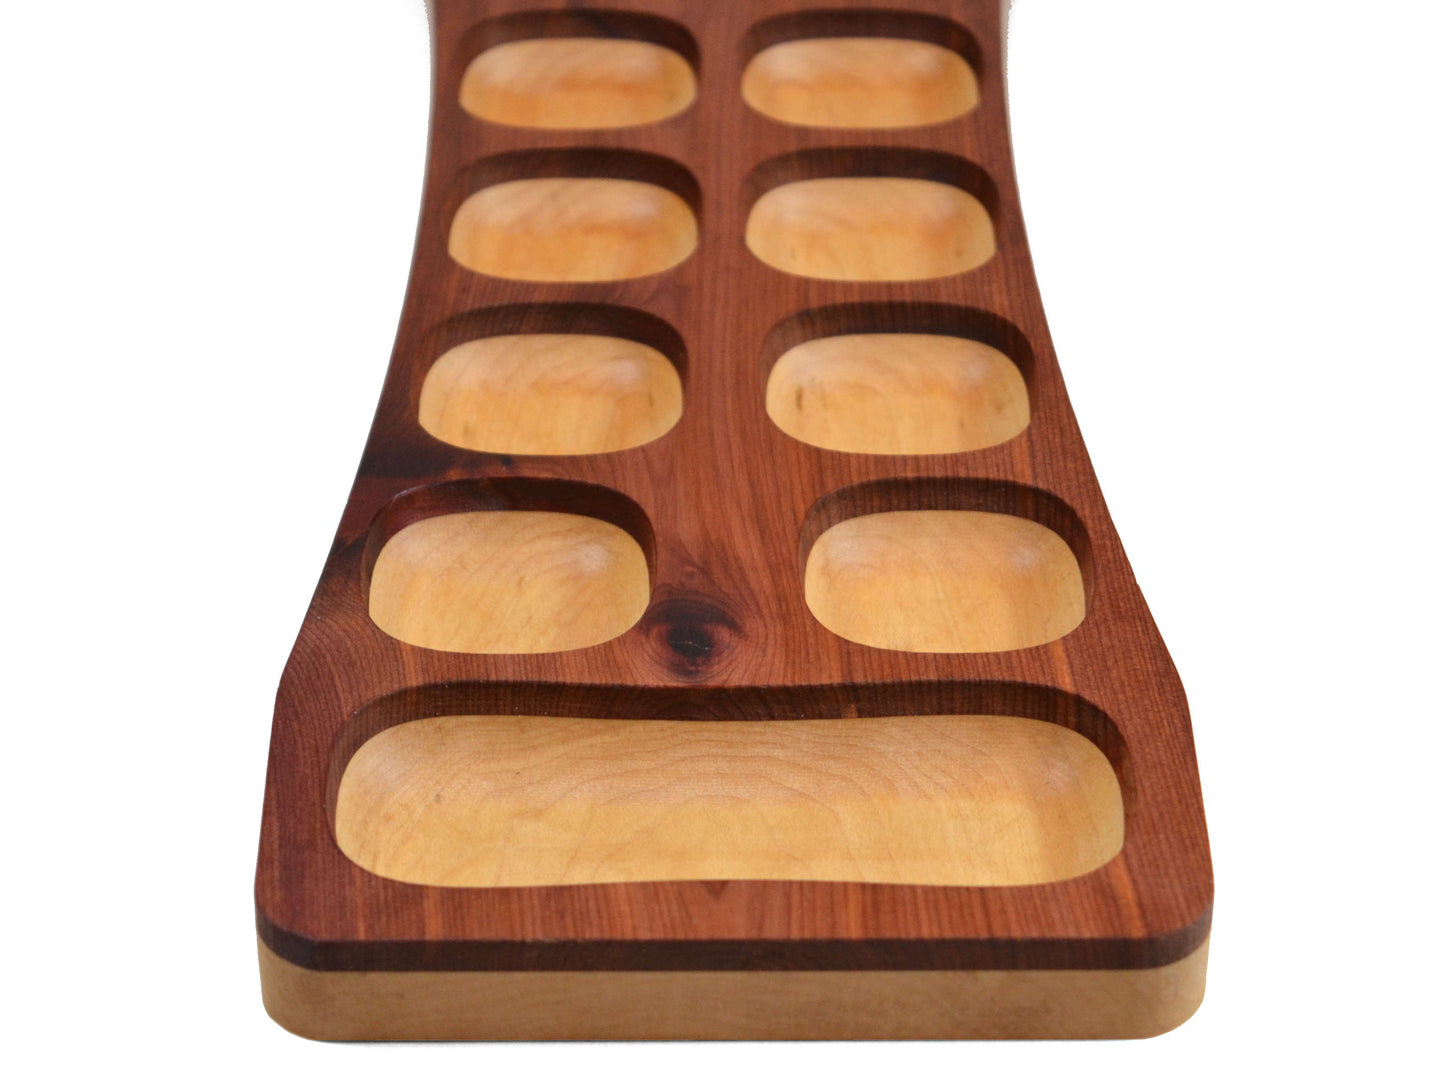 red top handmade wooden mancala game board